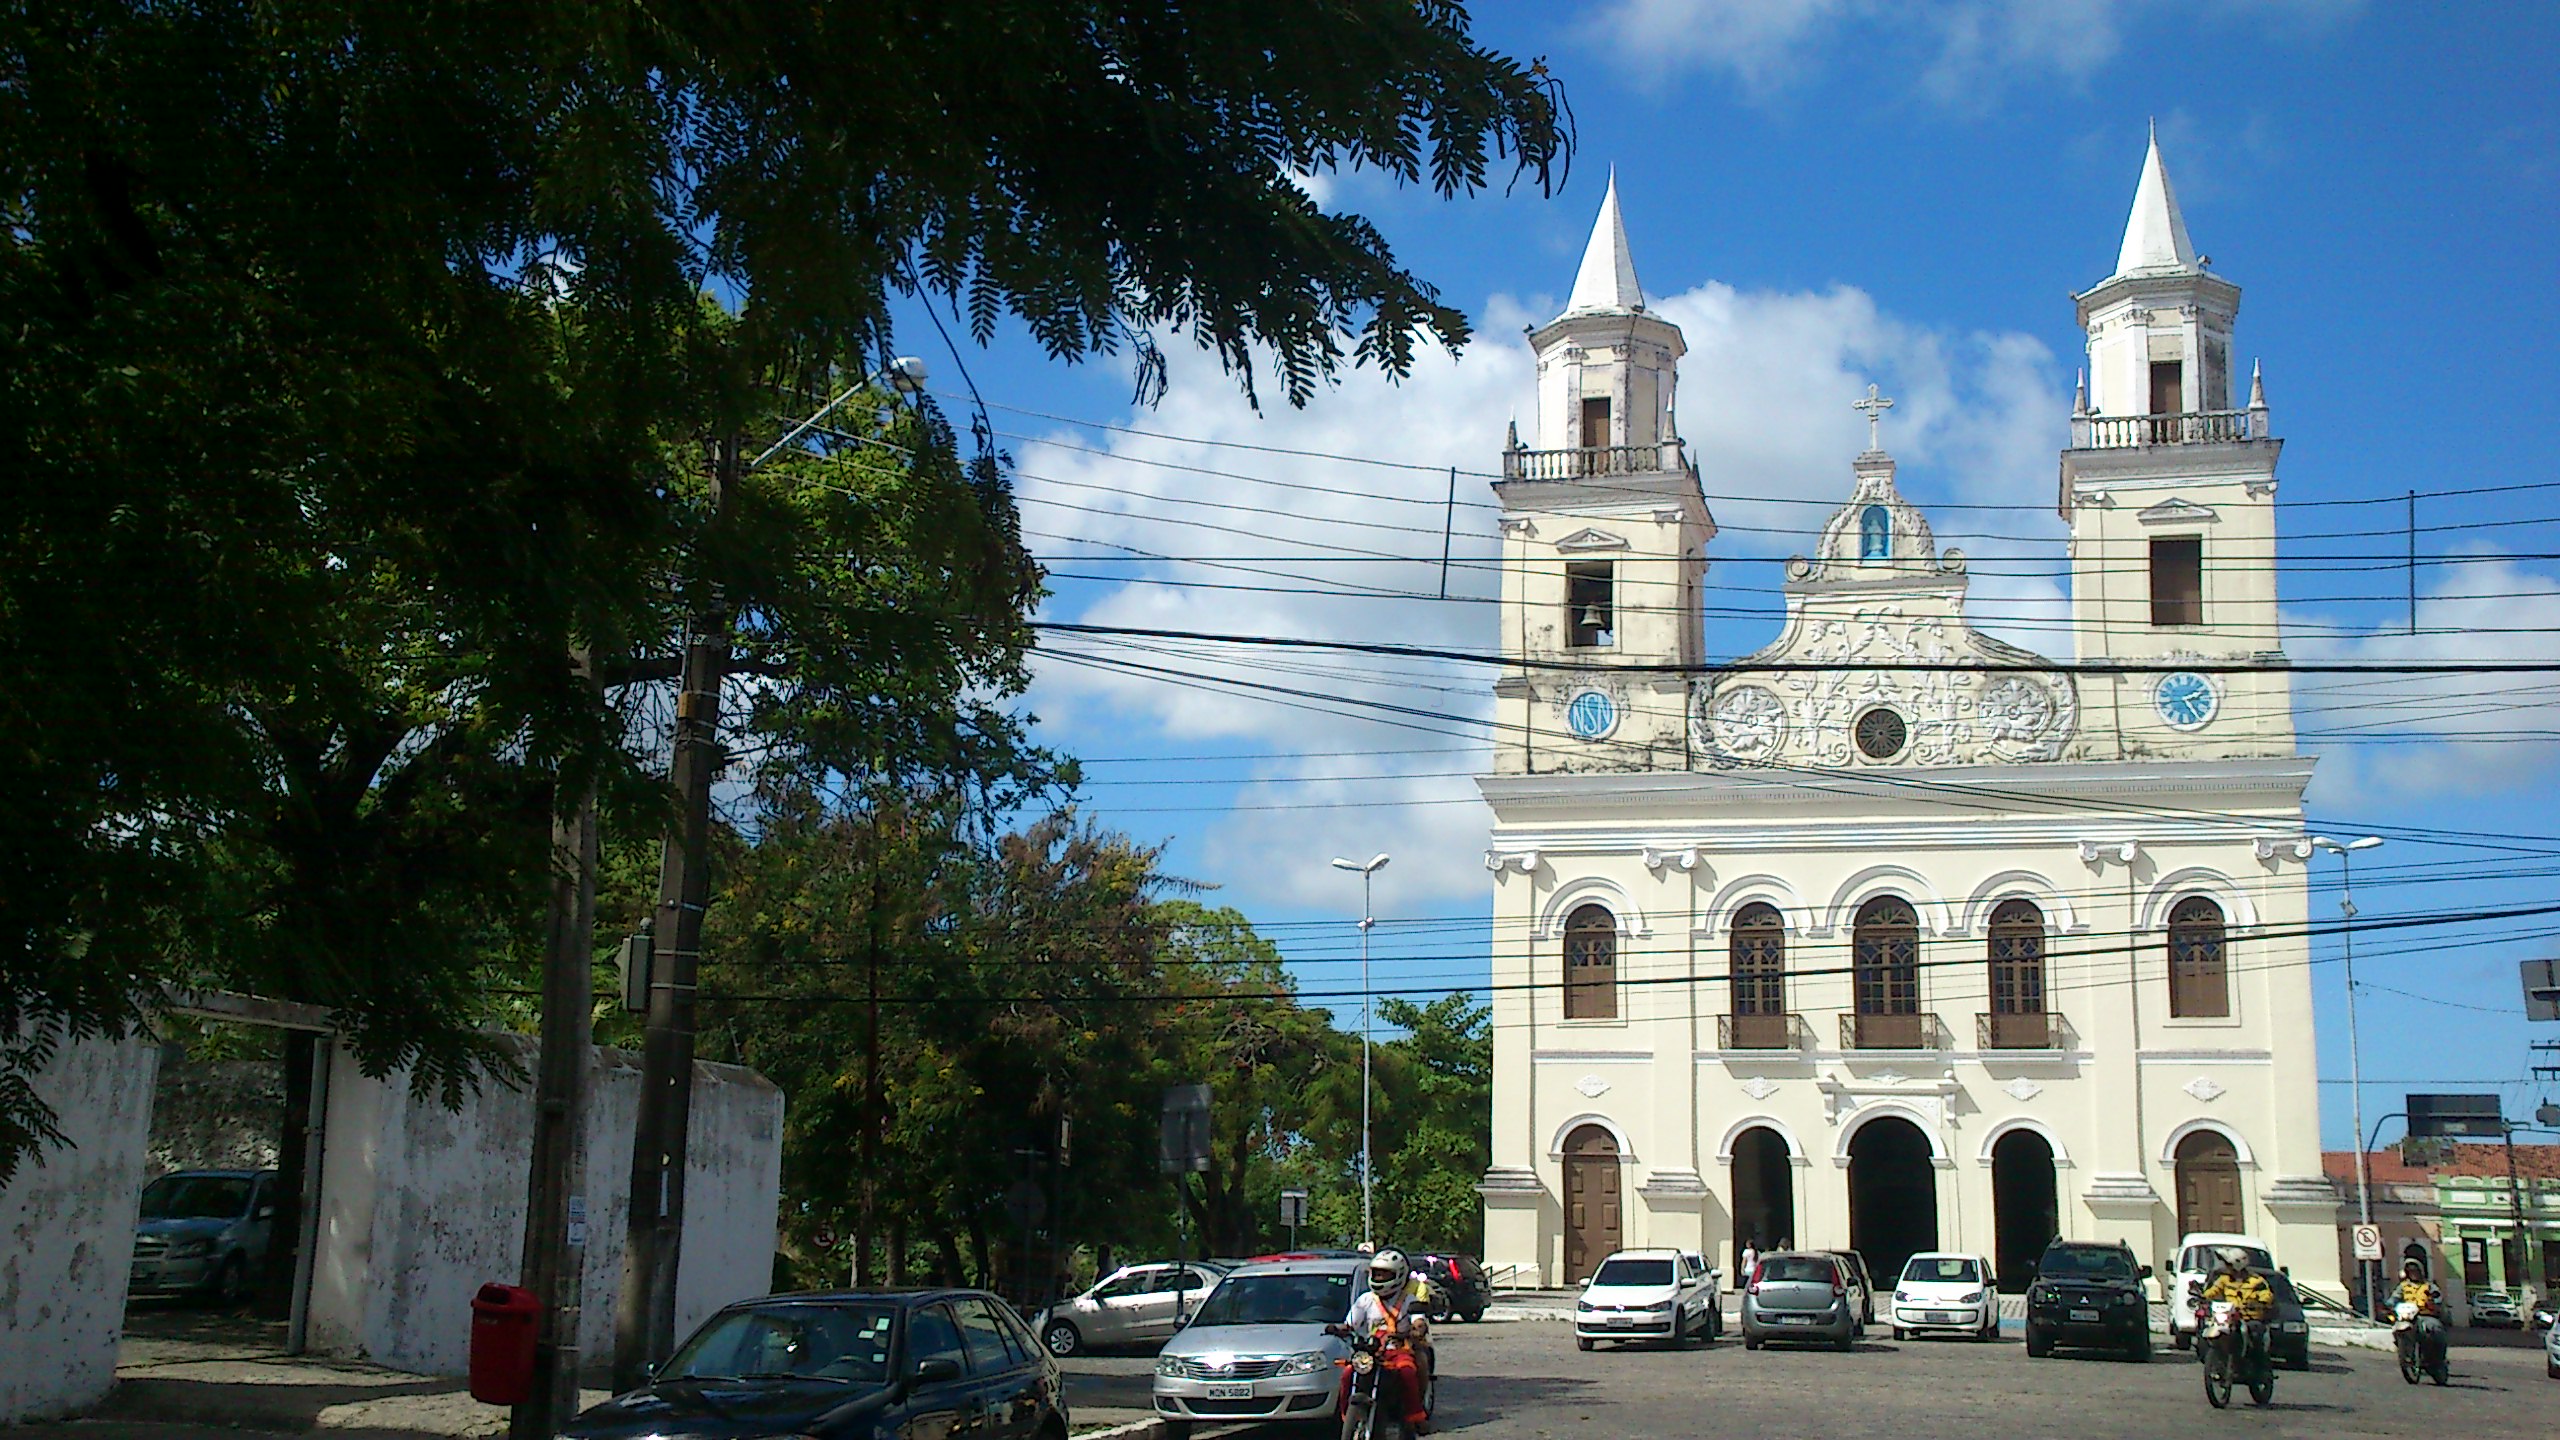 a church with white and brown architecture and two towers